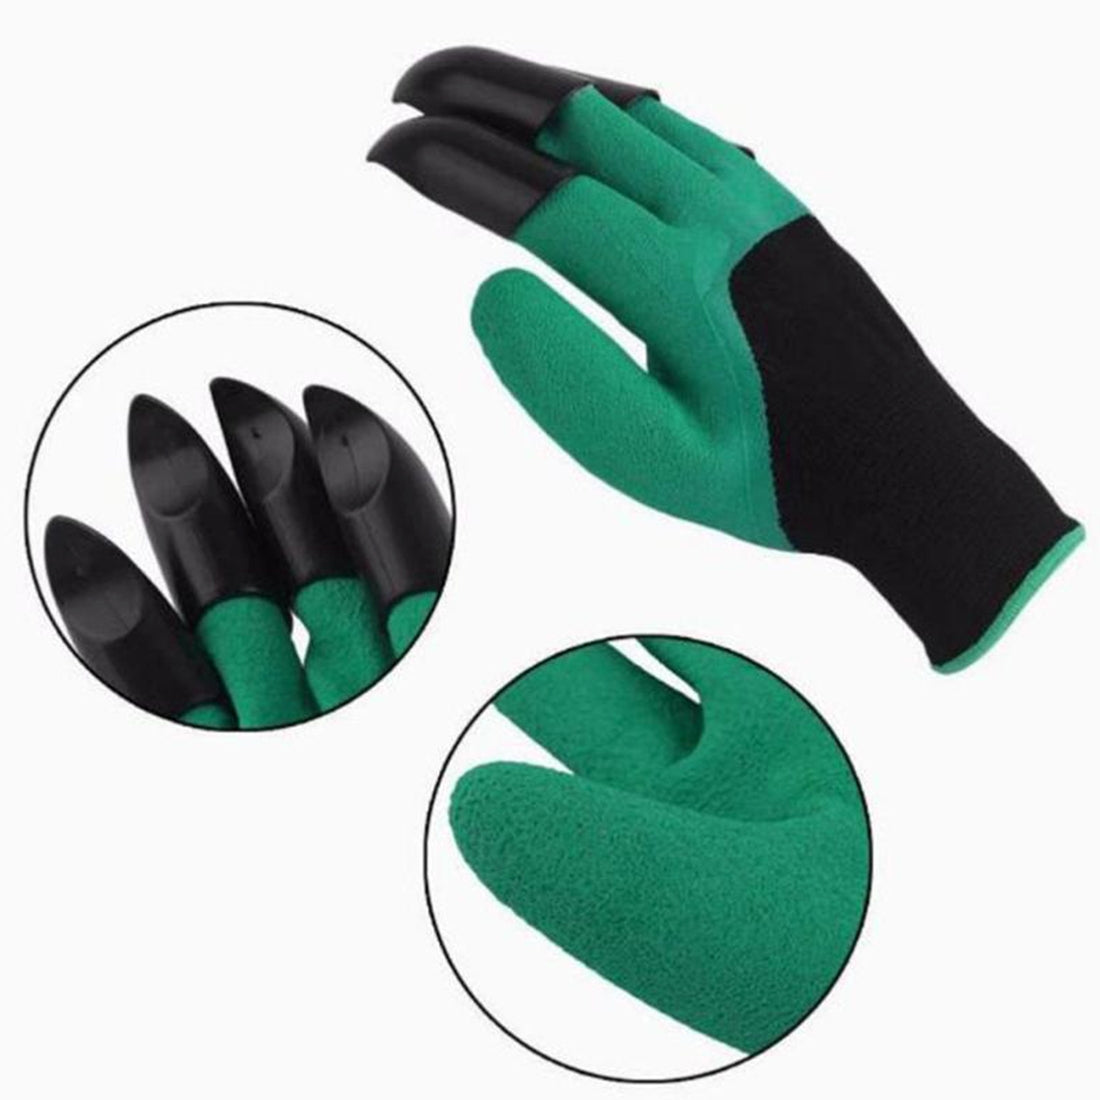 A Pair Latex Gloves ABS Gloves for Digging and Planting,The Right One with Claws